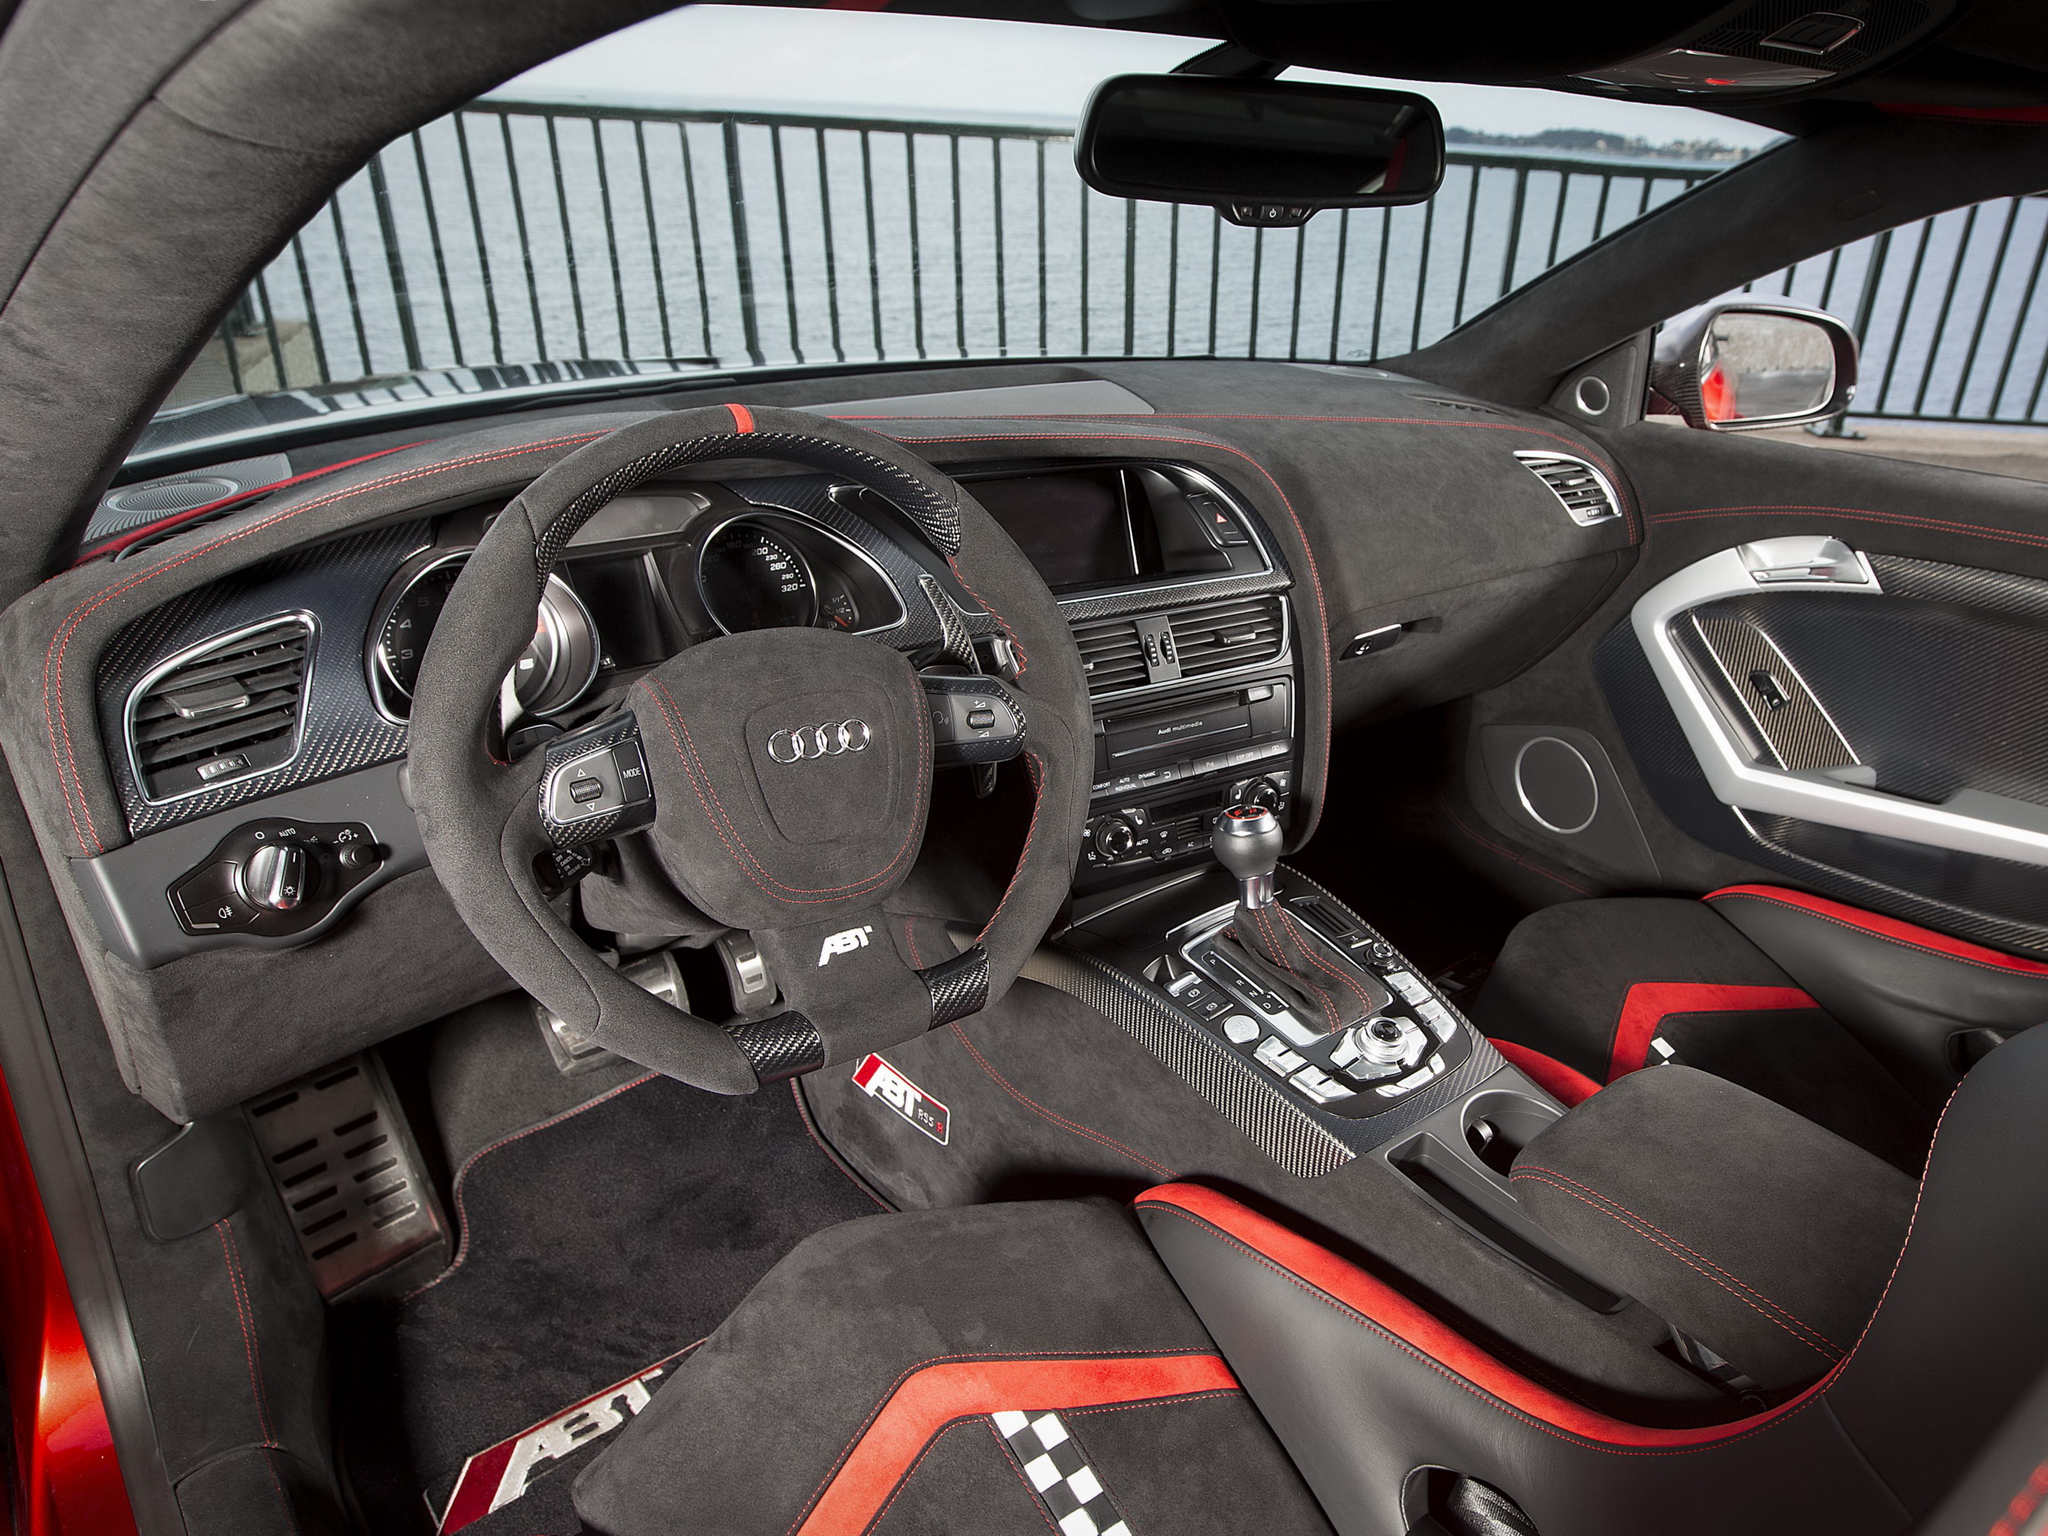 2014, Abt, Audi, Rs5 r, Coupe, Tuning, R55, Interior Wallpaper